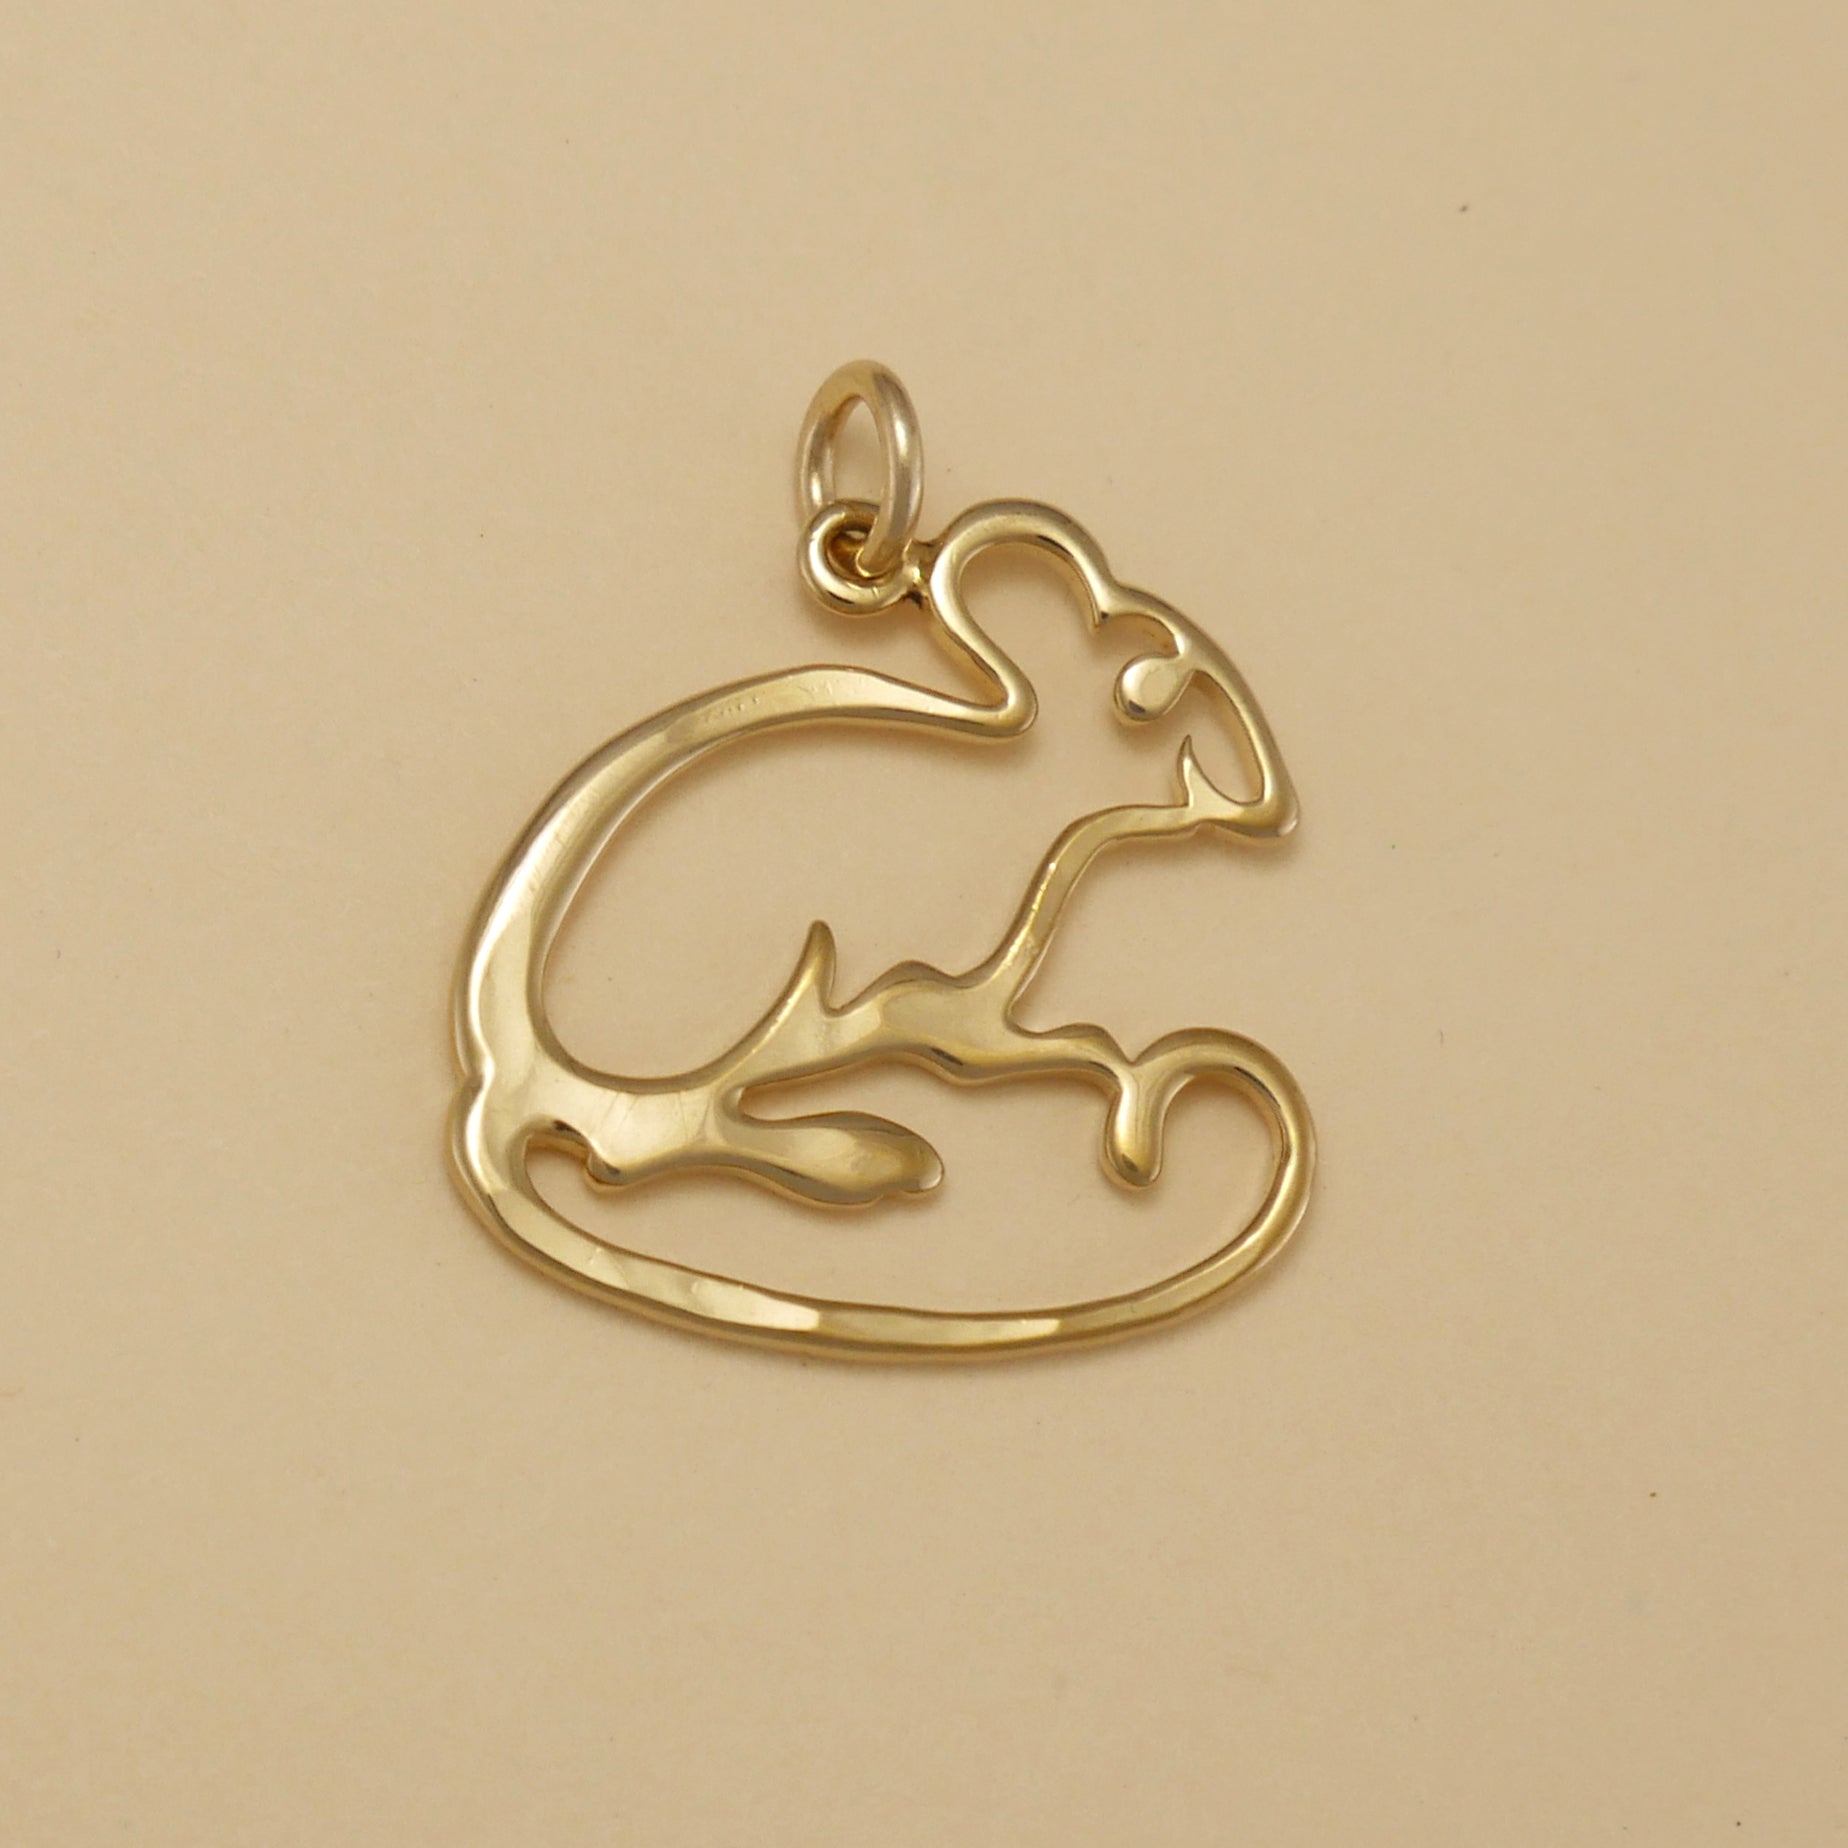 Mouse Charm - Charmworks